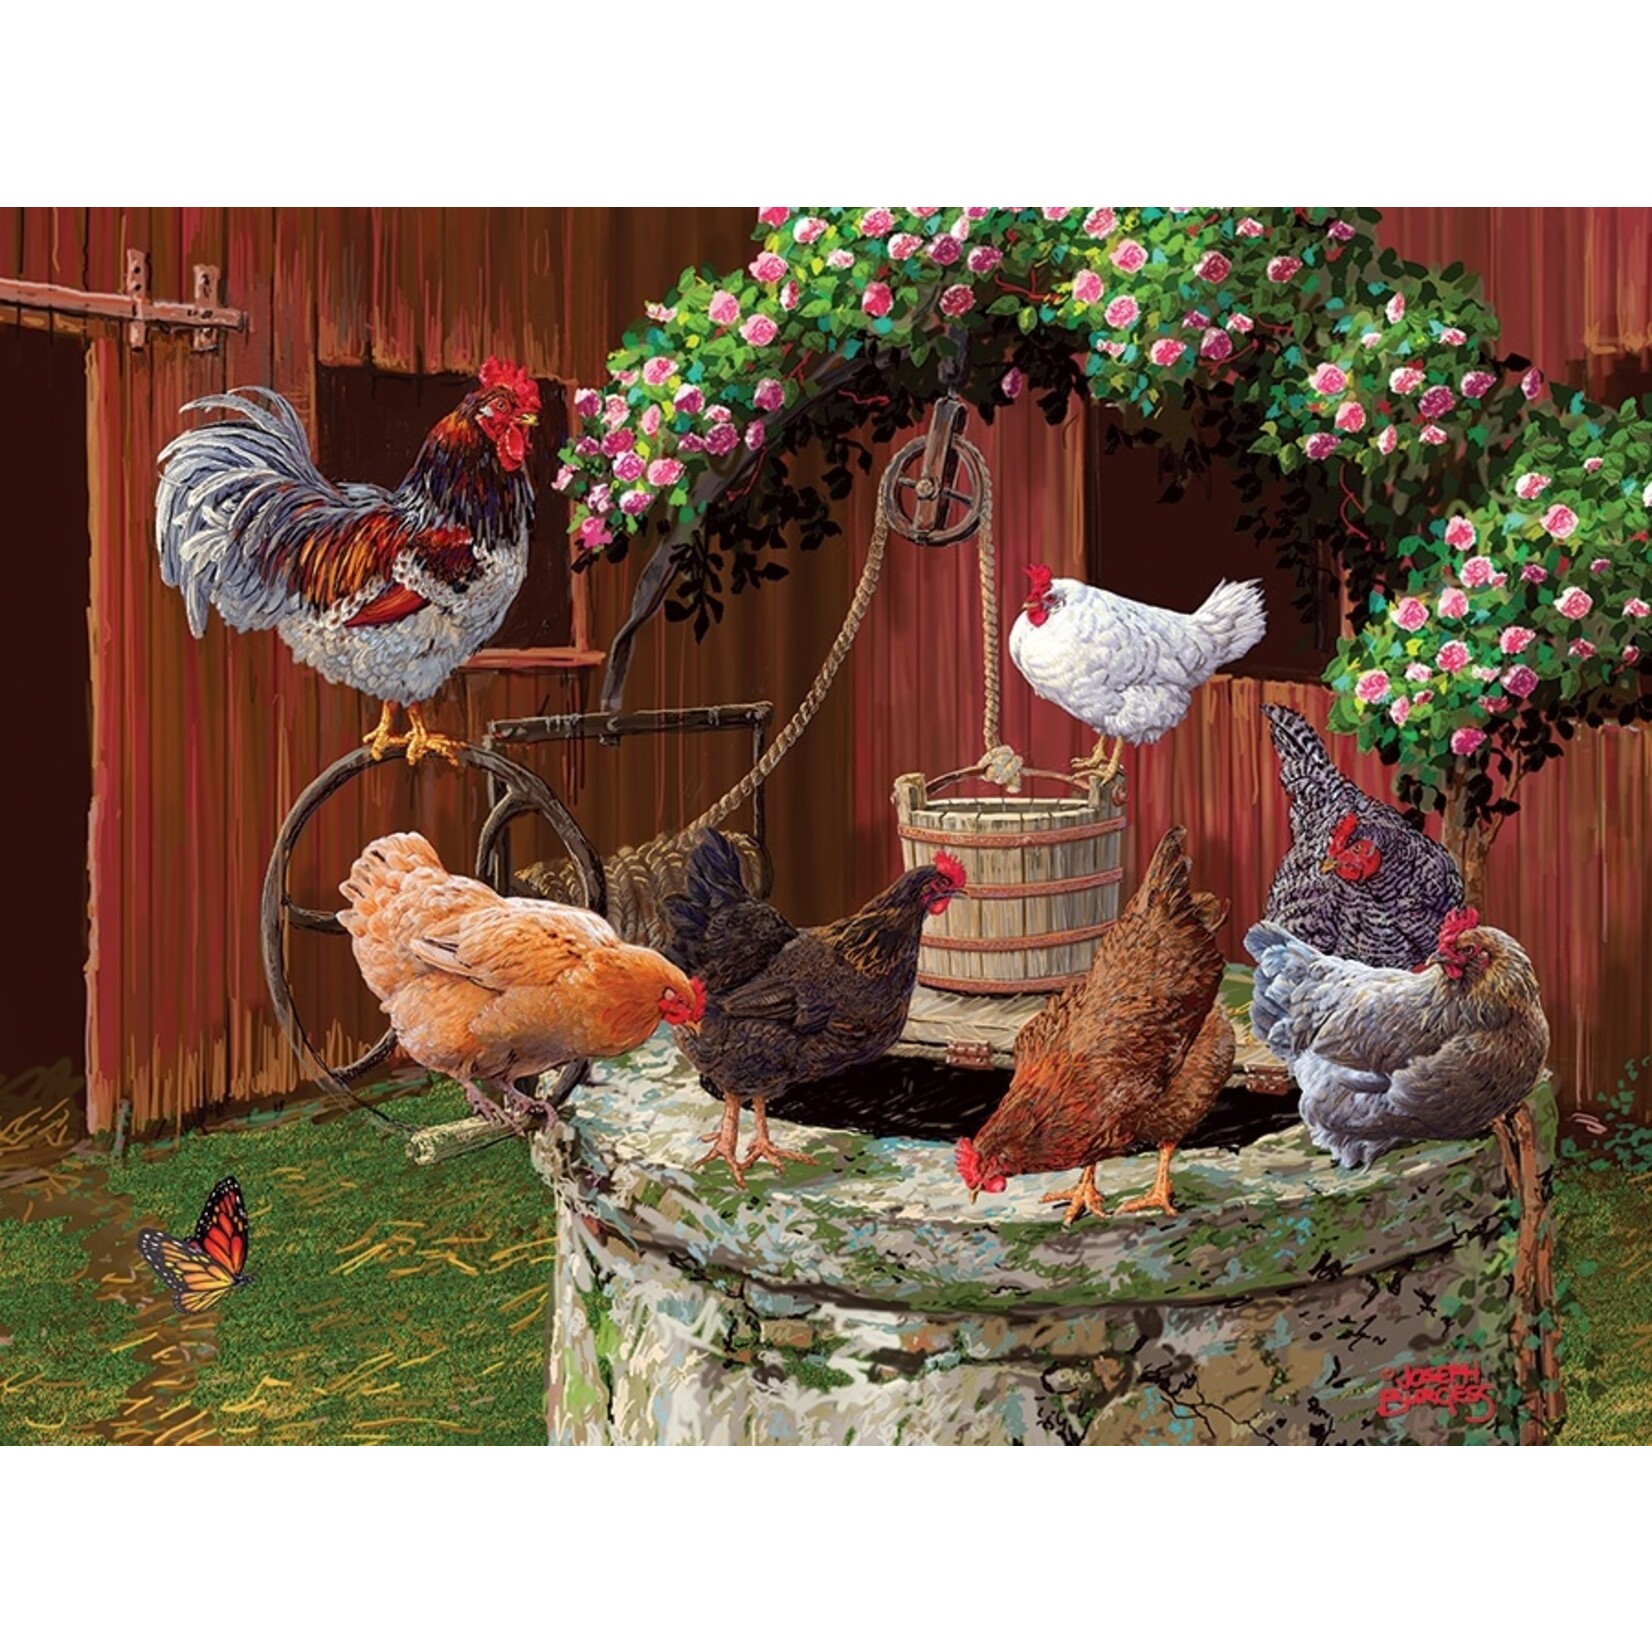 Cobble Hill 275 Piece Puzzle The Chickens are well